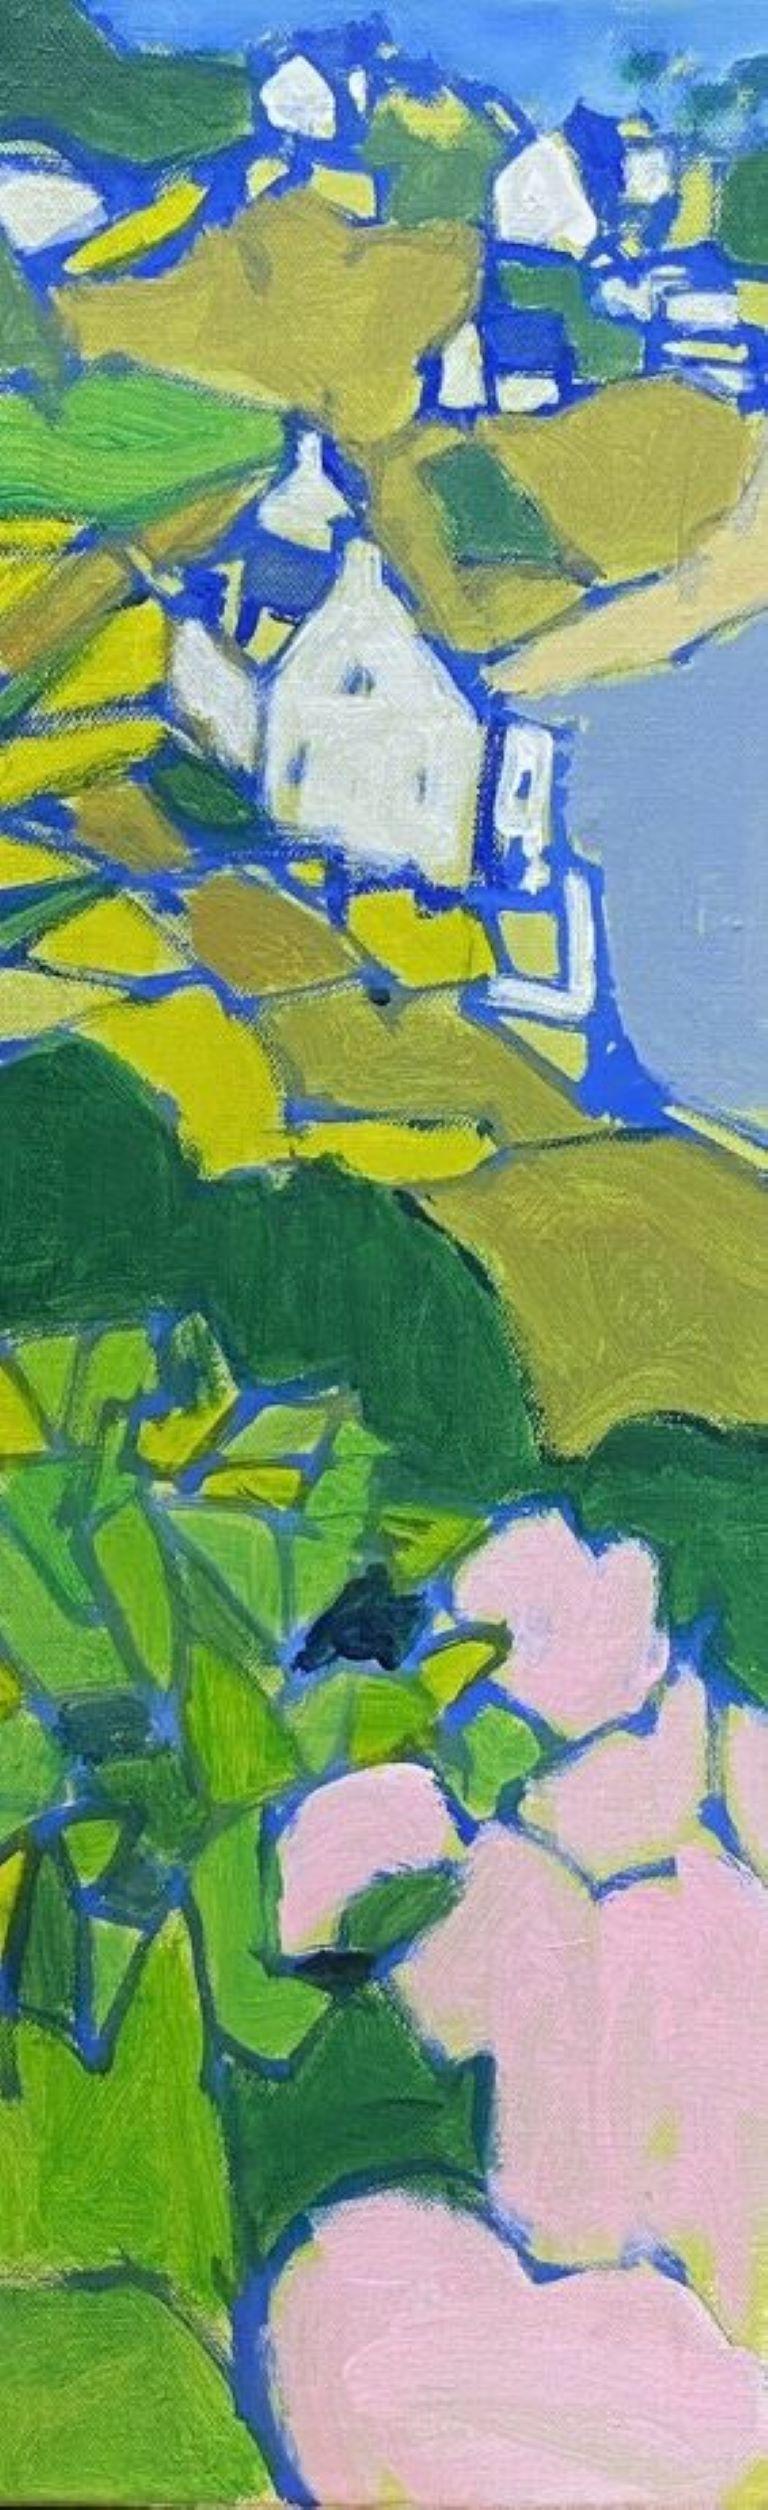 R.Leroy Landscape Painting - LEROY - FRENCH CONTEMPORARY CUBIST PAINTING - GREEN PINK & BLUES LANDSCAPE